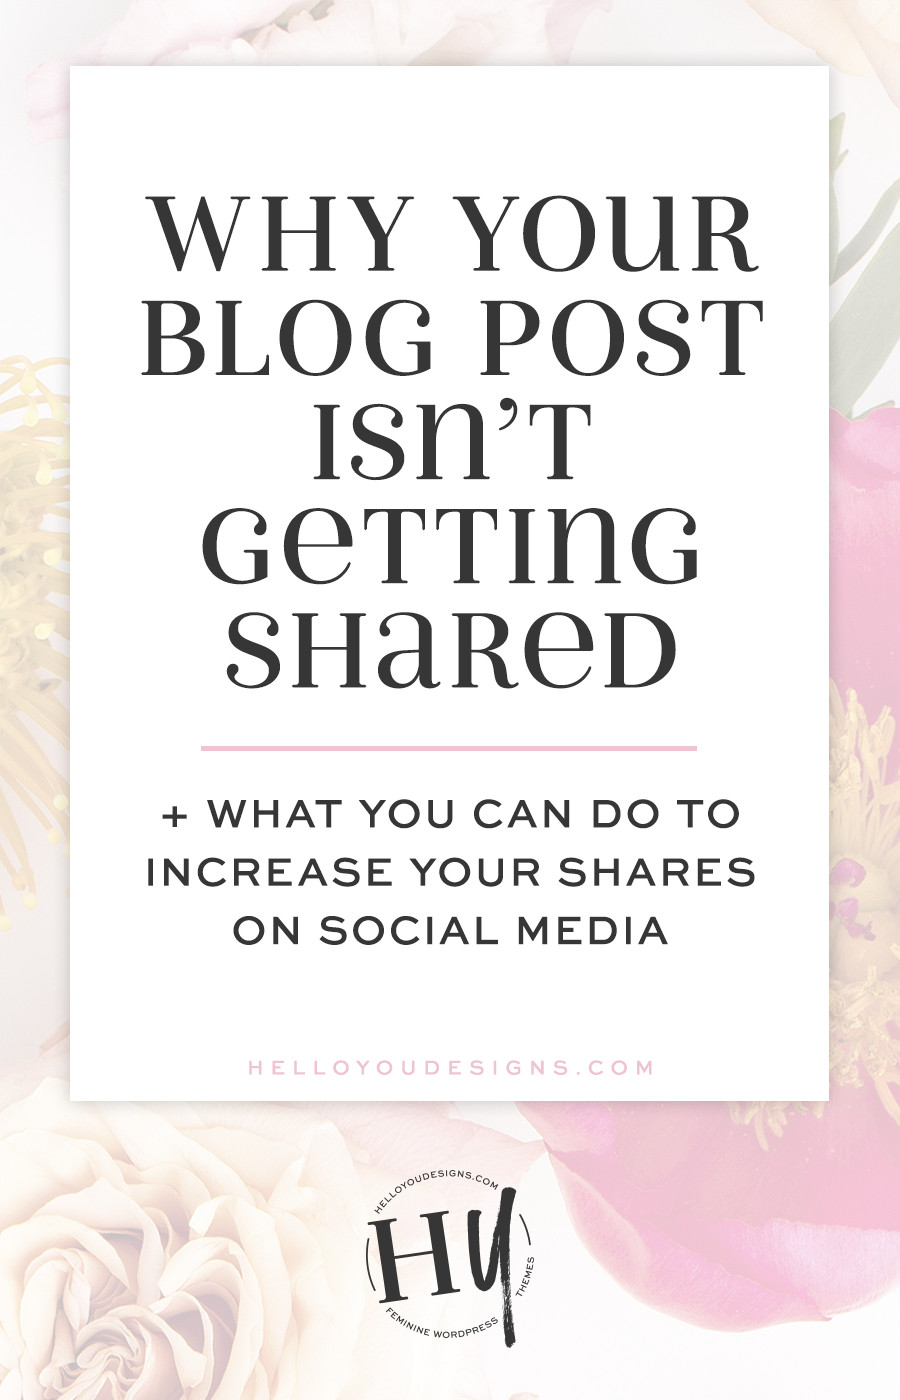 Why your blog post isn't getting shared